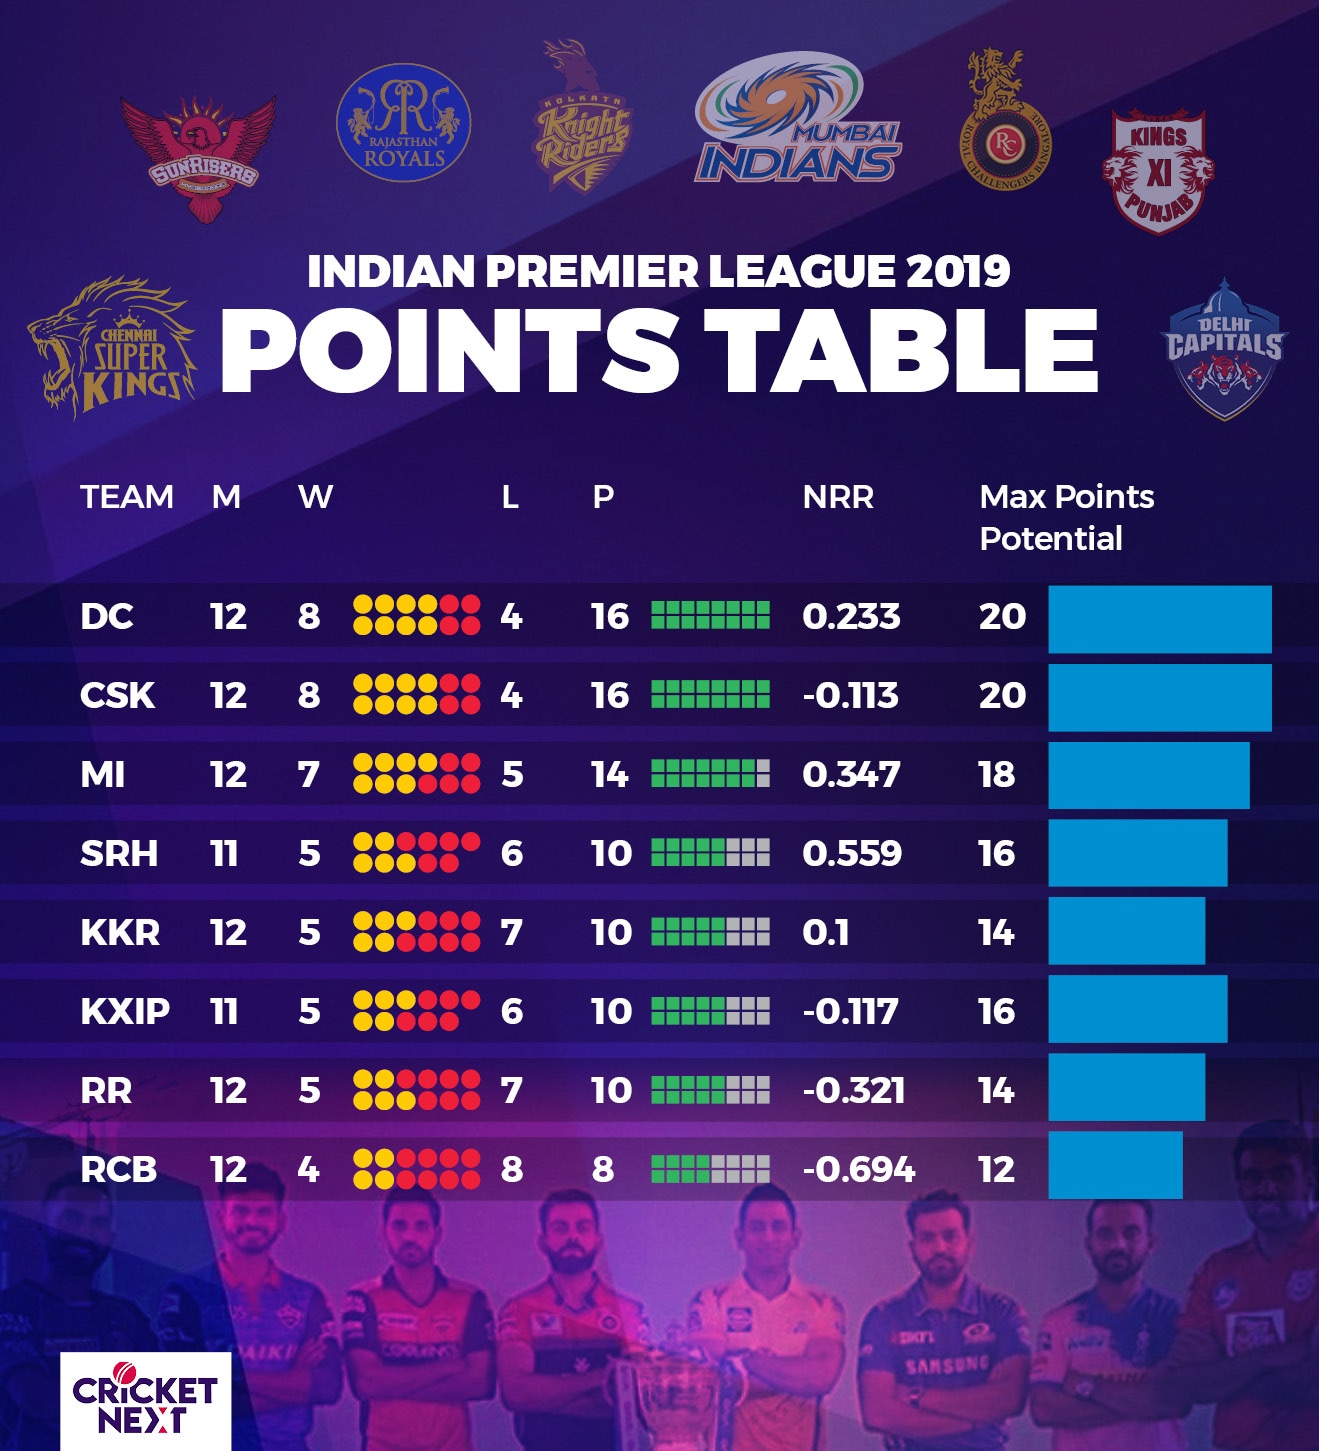 IPL Qualification Scenarios RCB Still Not Out, MI All But Through to